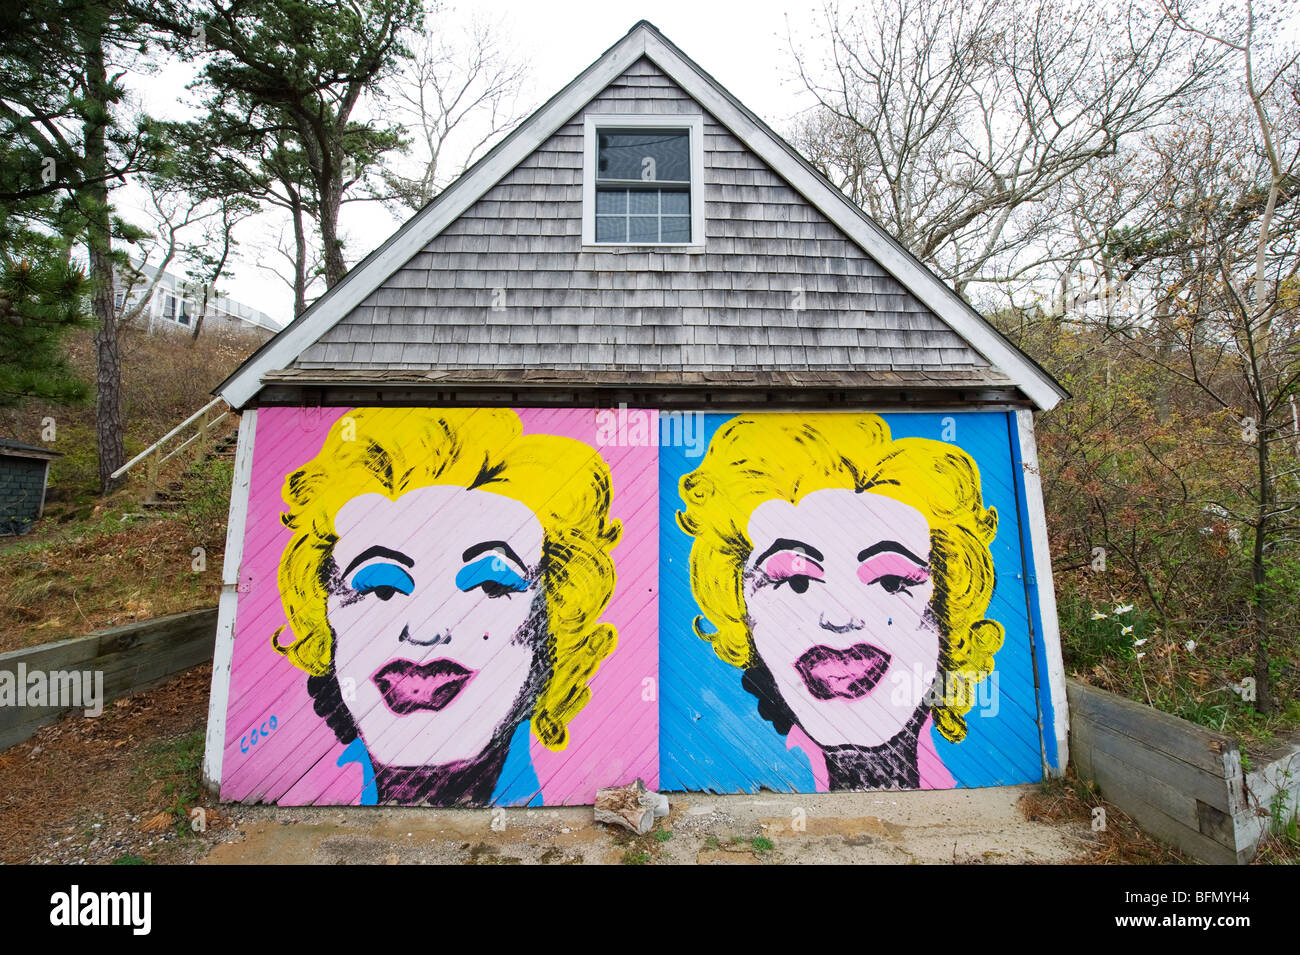 USA, Massachussets, Cape Cod, garage door painted with Marilyn Monroe face Stock Photo